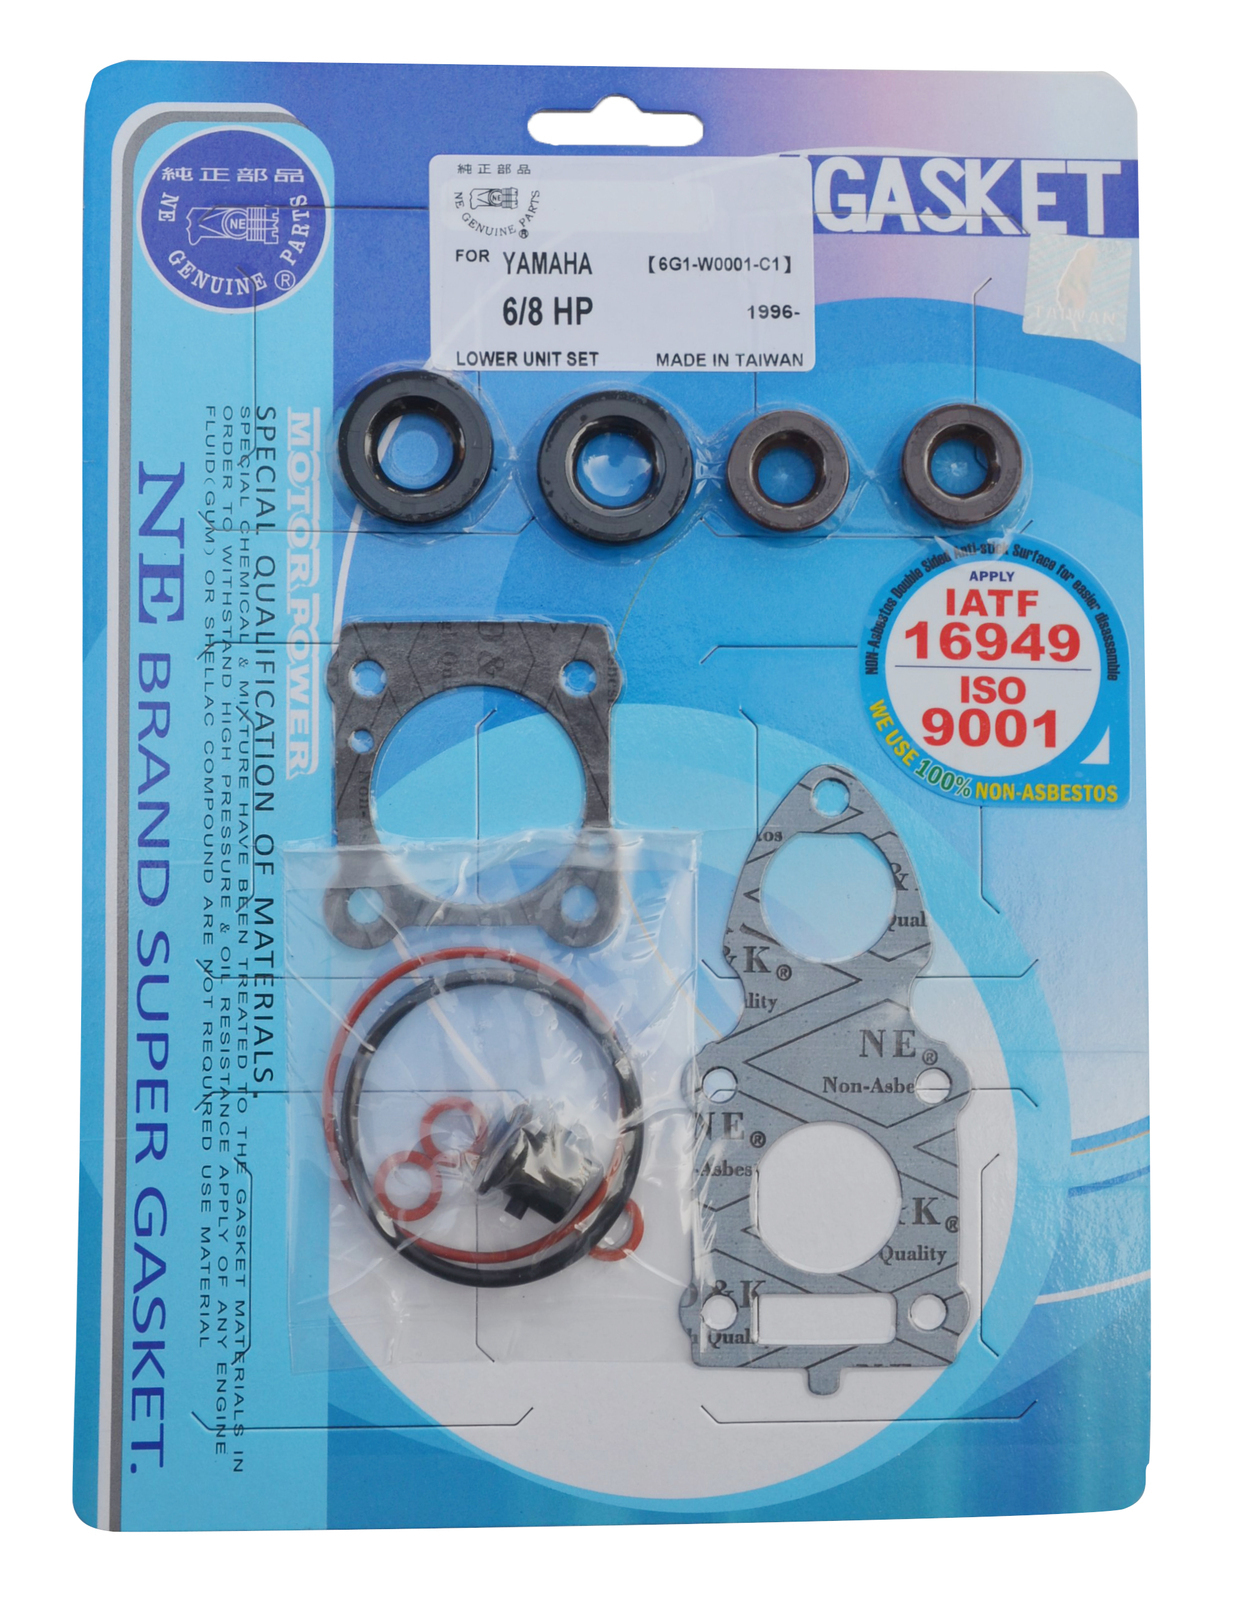 LOWER UNIT SEAL & GASKET KIT FOR YAMAHA 6HP 8HP 1986 - 2013 OUTBOARD # 6G1-W0001-C1